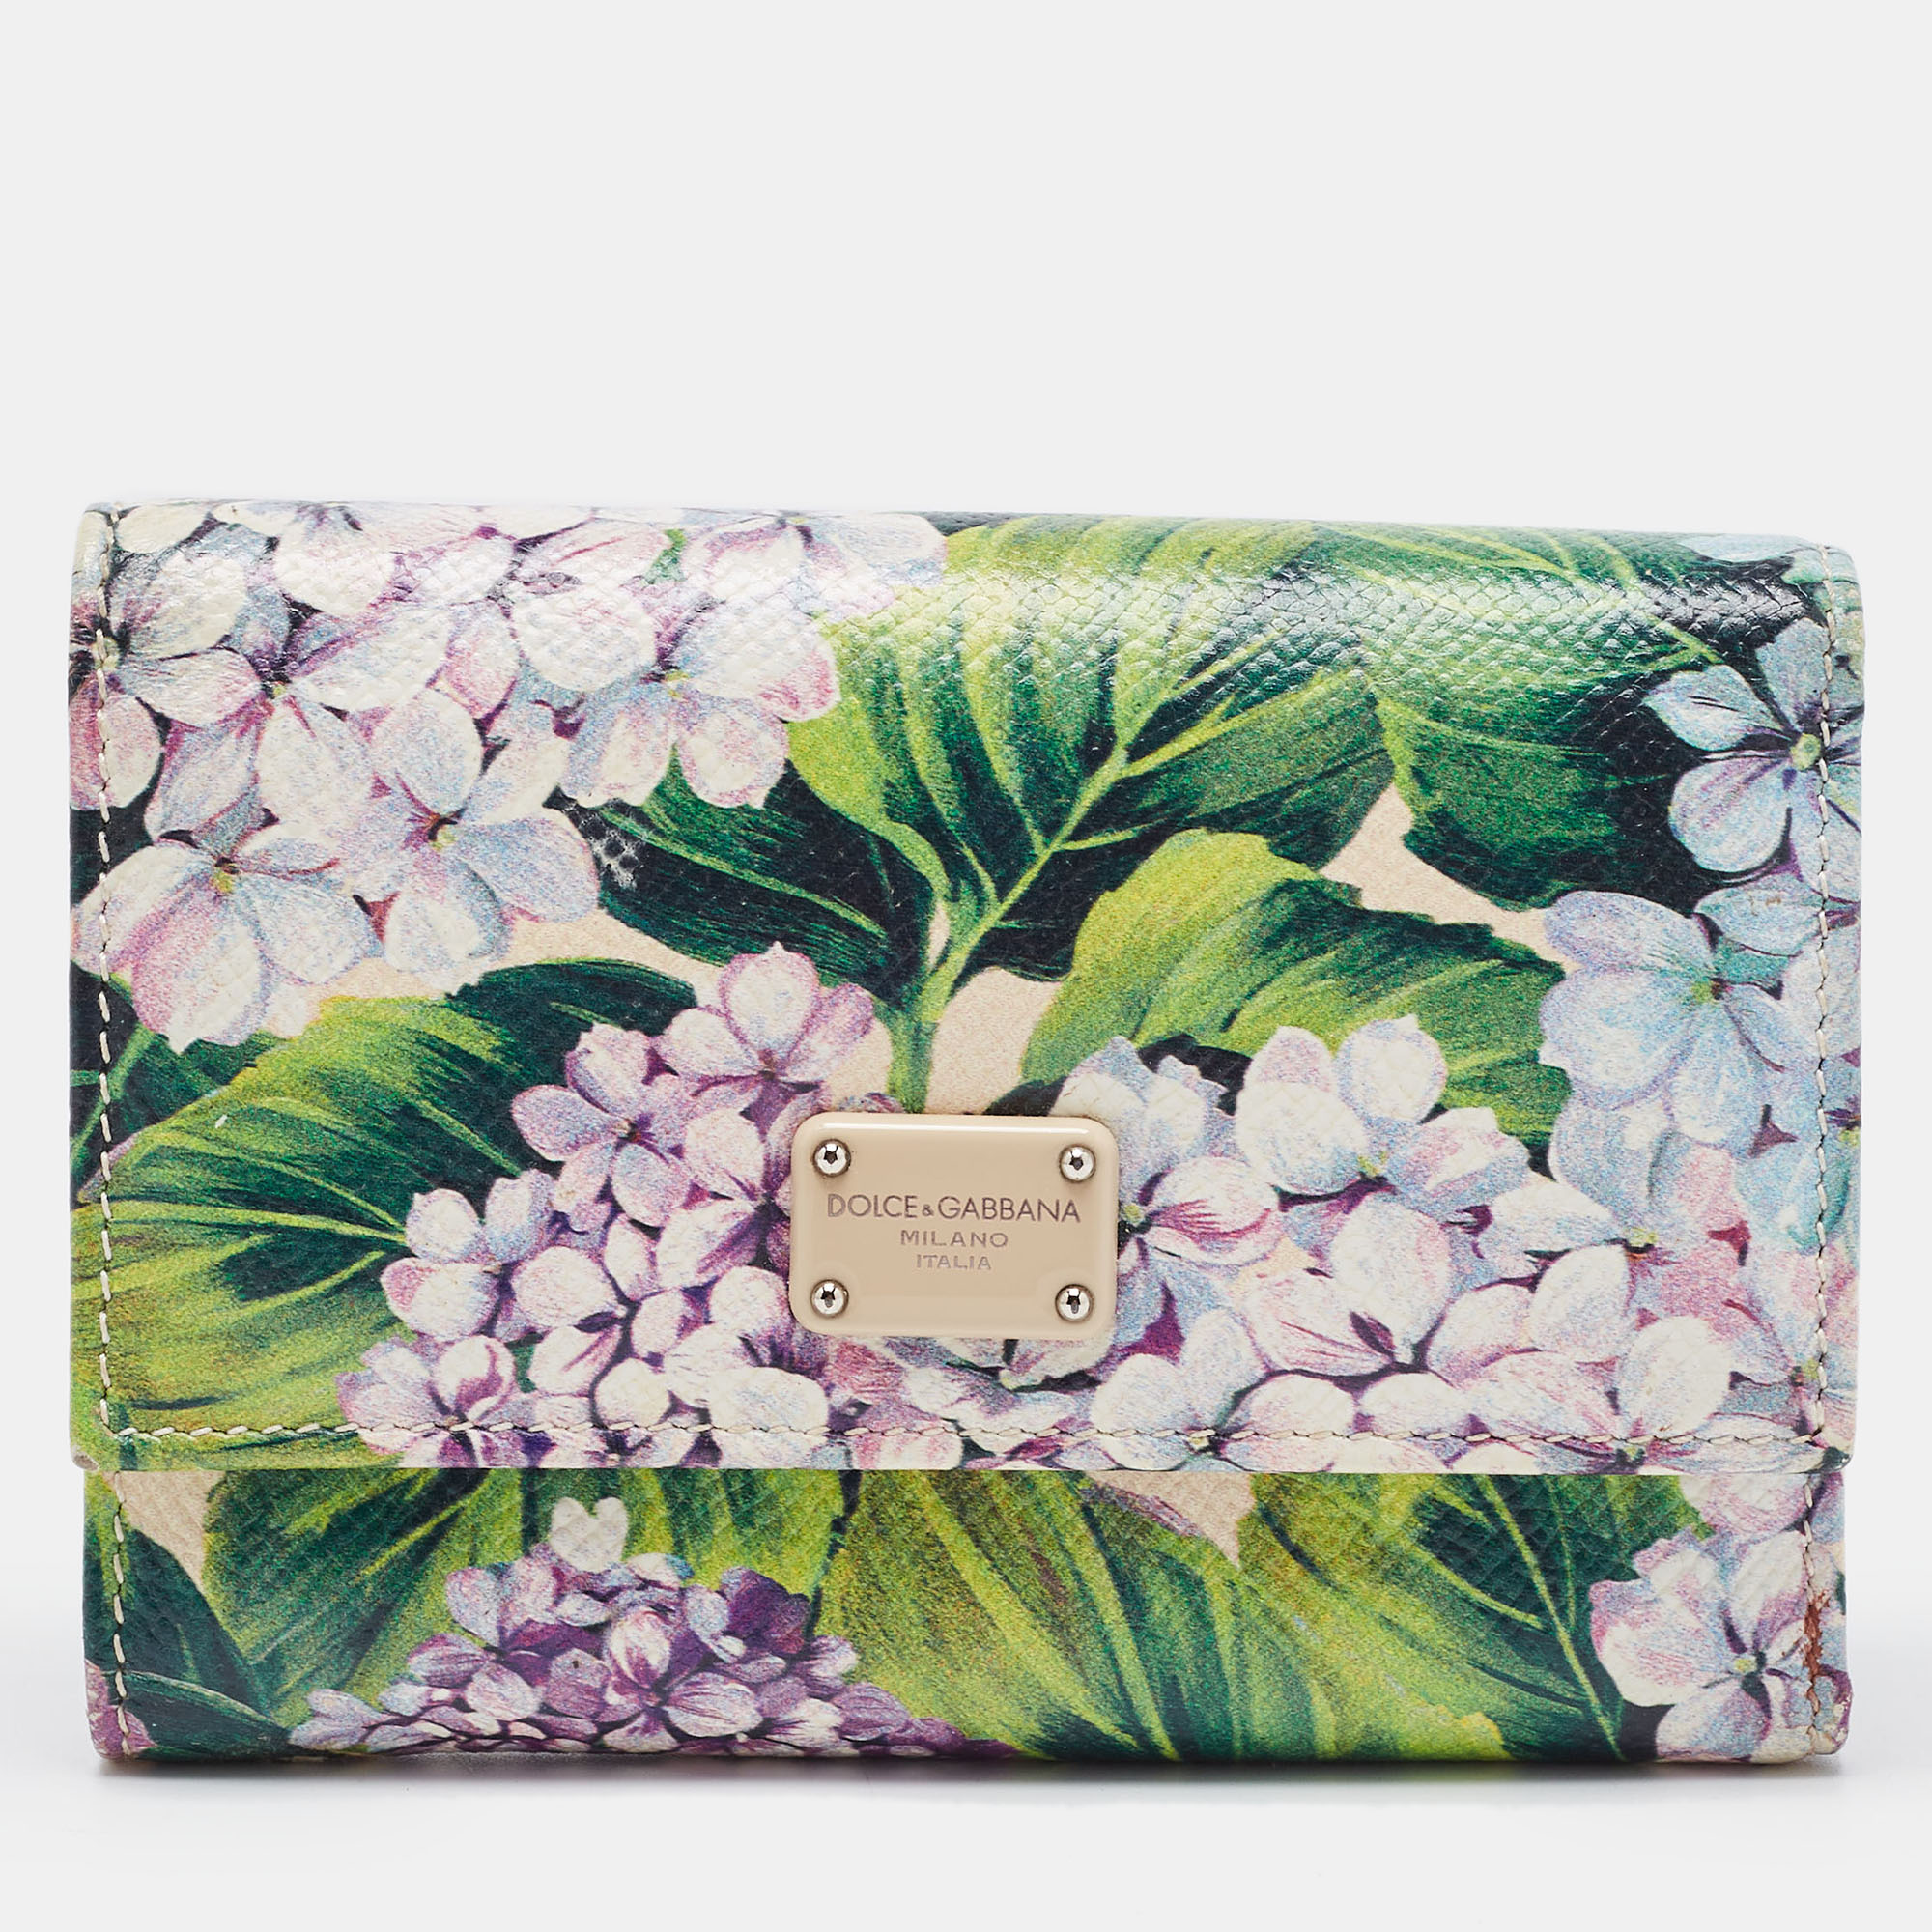 

Dolce & Gabbana Multicolor Floral Print Leather Trifold Wallet